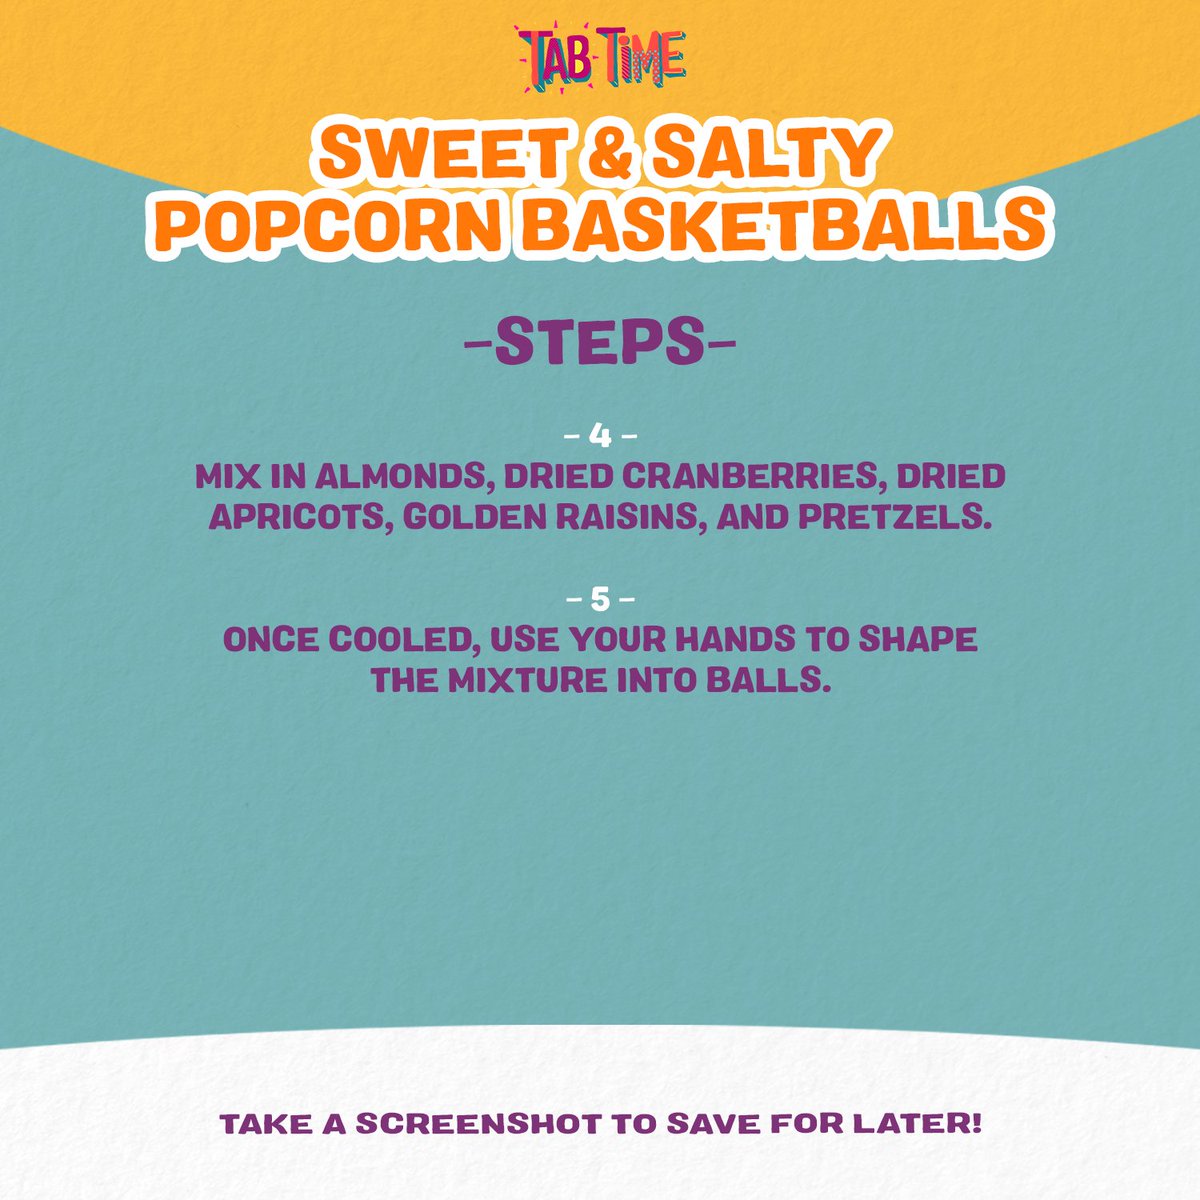 Does losing a game sometimes make you feel a little salty? 🧂😝 Thankfully, Ms. Tab has the perfect post-game snack that’s sure to be a winner: Sweet & Salty Popcorn Basketballs! 🥨🍿

#TabithaBrown #TabTime #KidsSnacks #EasySnacks